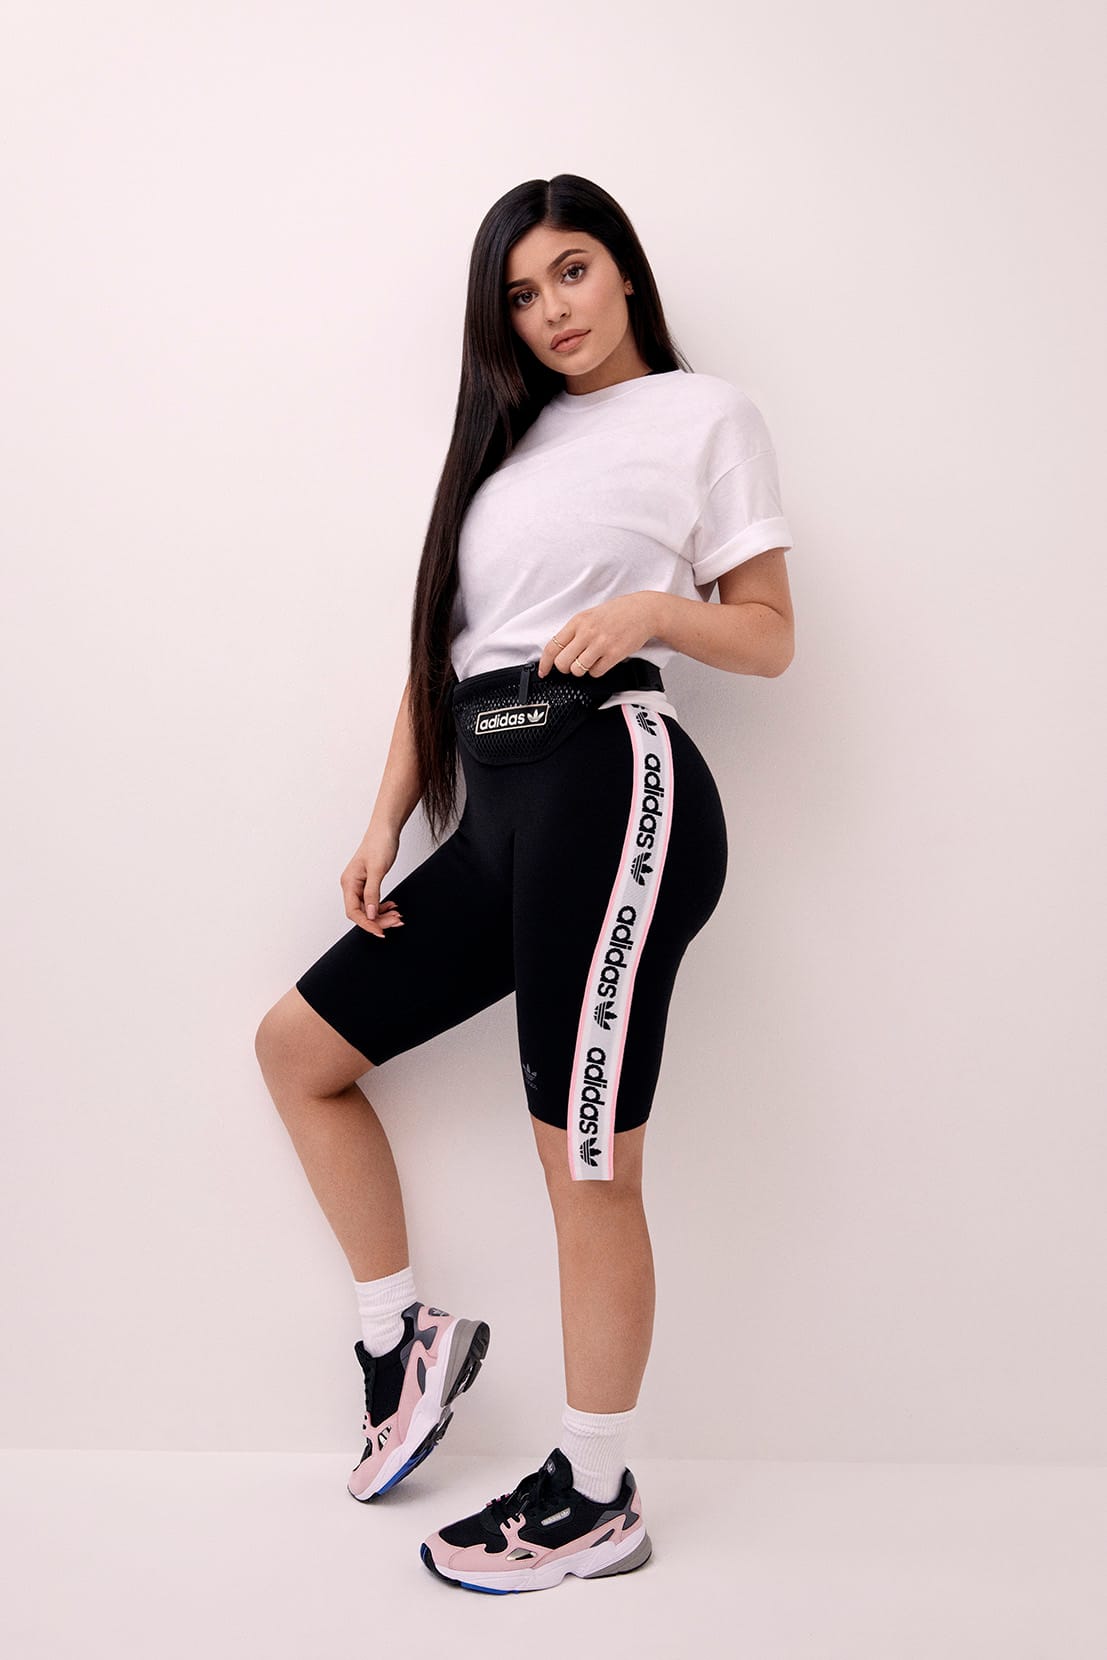 kylie jenner wearing adidas falcon